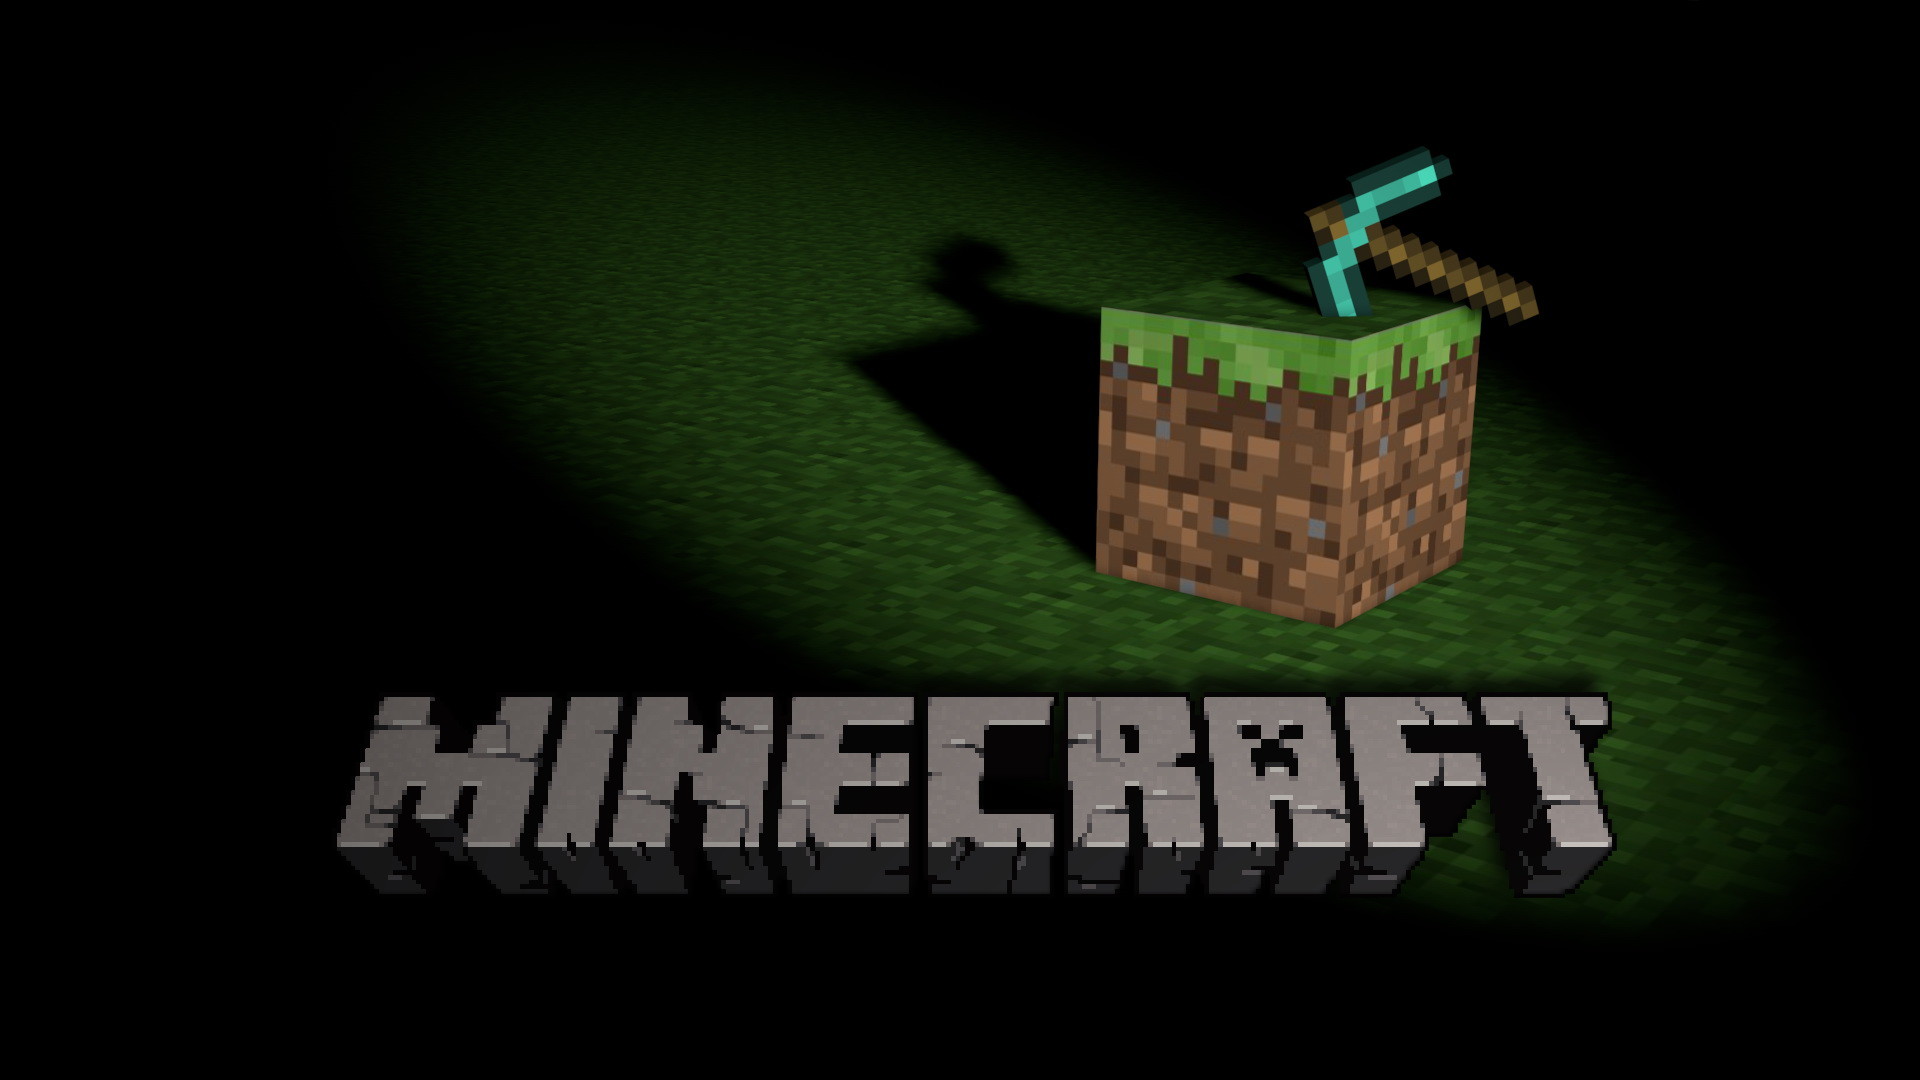 1920x1080 HQFX Minecraft HD Wallpapers, High Quality, Wallpapers and Pictures for PC  & Mac,